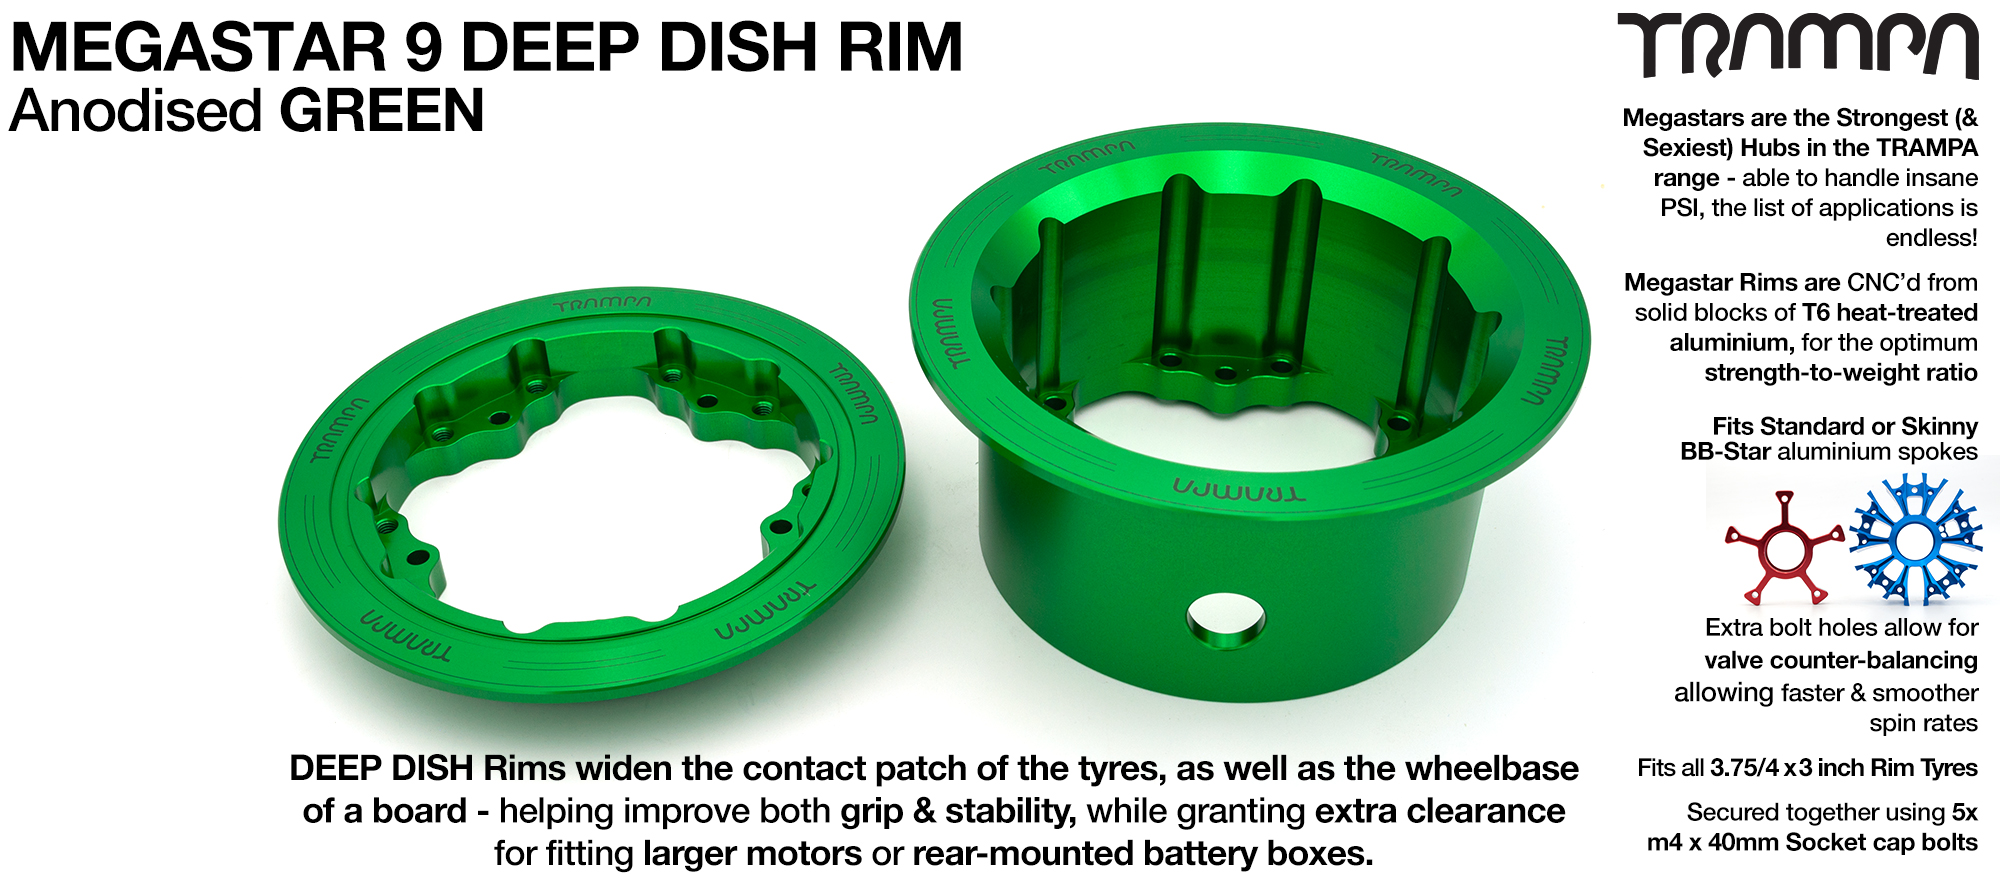 MEGASTAR 9 DD Rims Measure 3.75/4x 3 Inch. The Bearings are positioned DEEP-DISH OFF-SET & accept 3.75 & 4 Inch Rim Tyres - GREEN